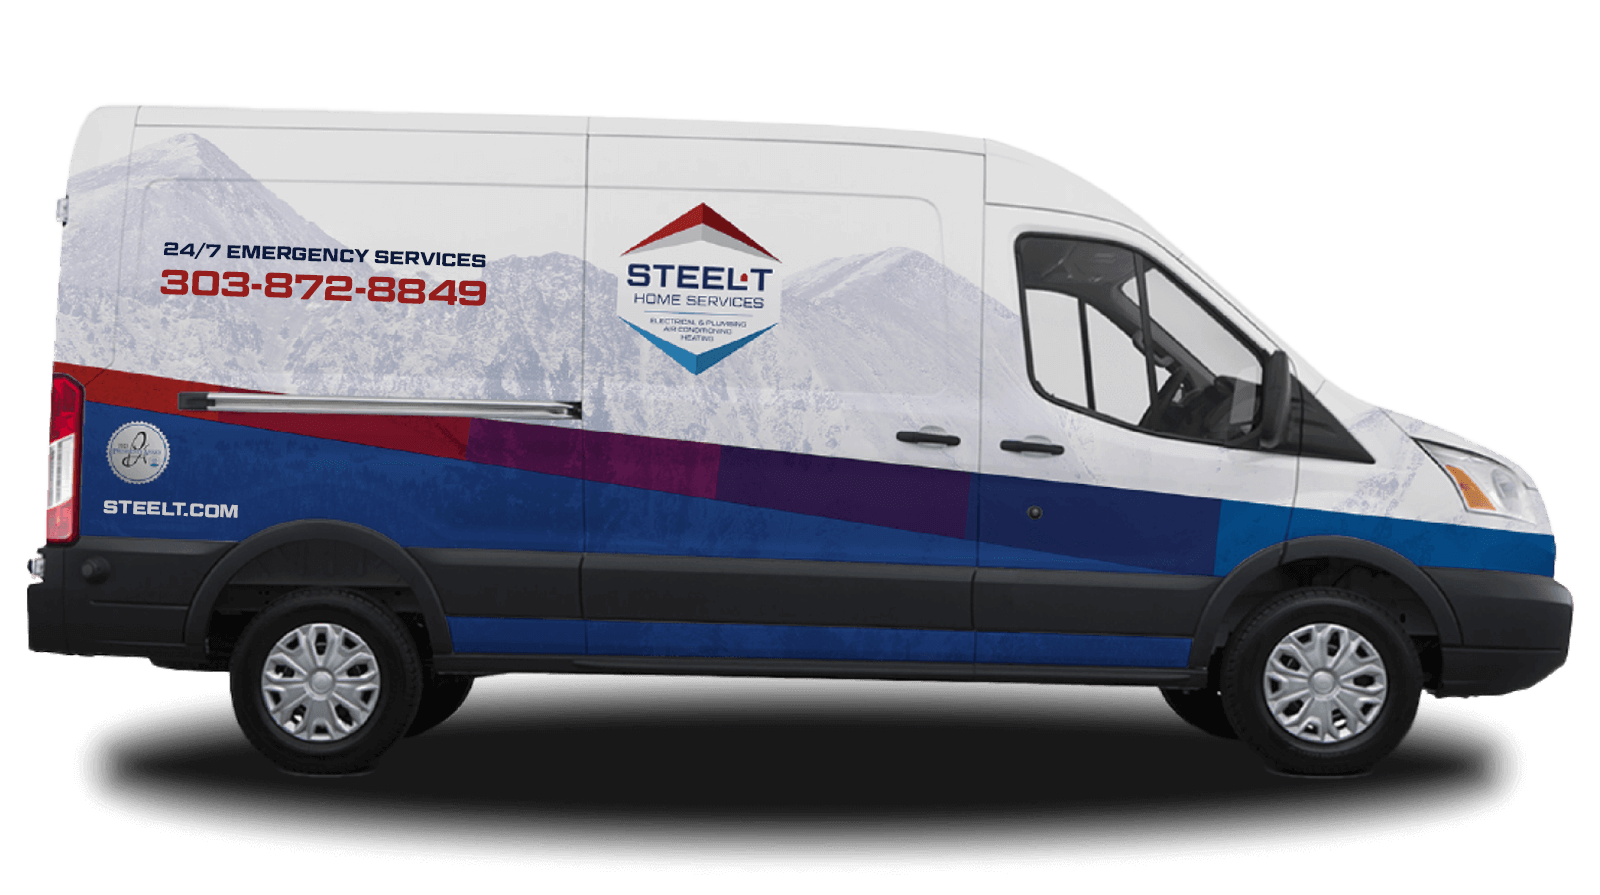 steel t home services